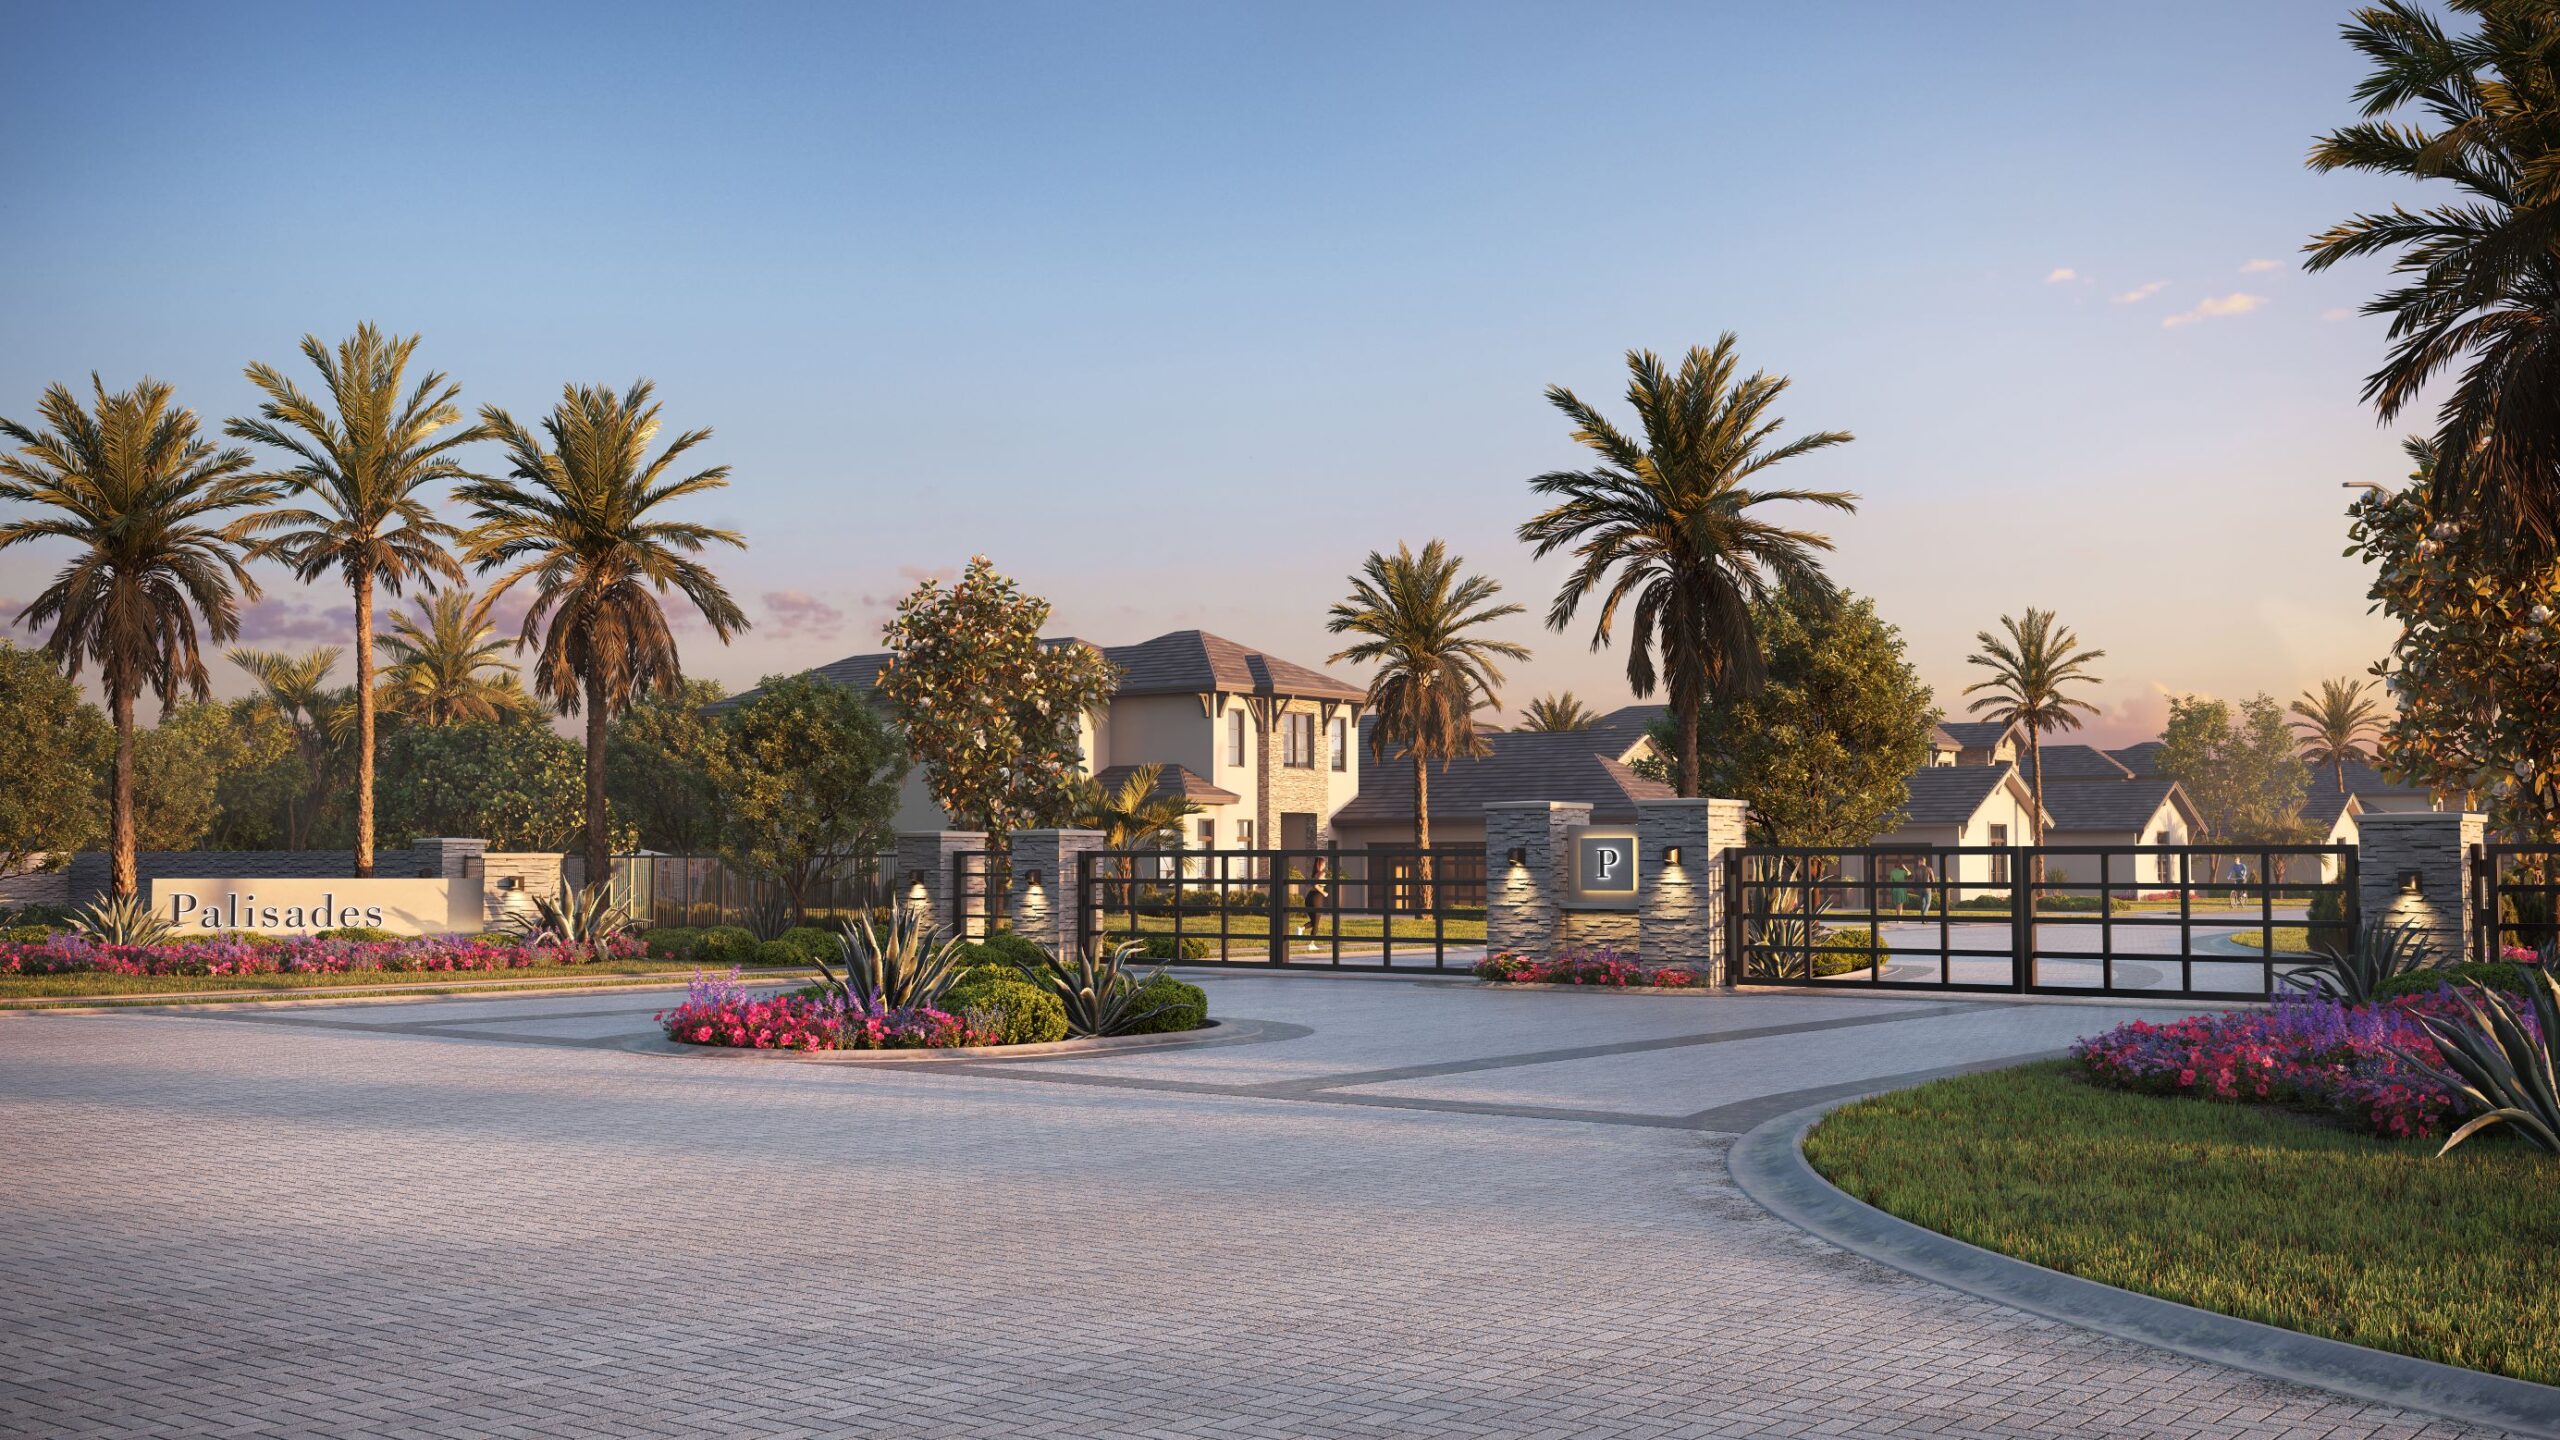 Seagate Residential invites homebuyers for March 28 exclusive tour of model homes